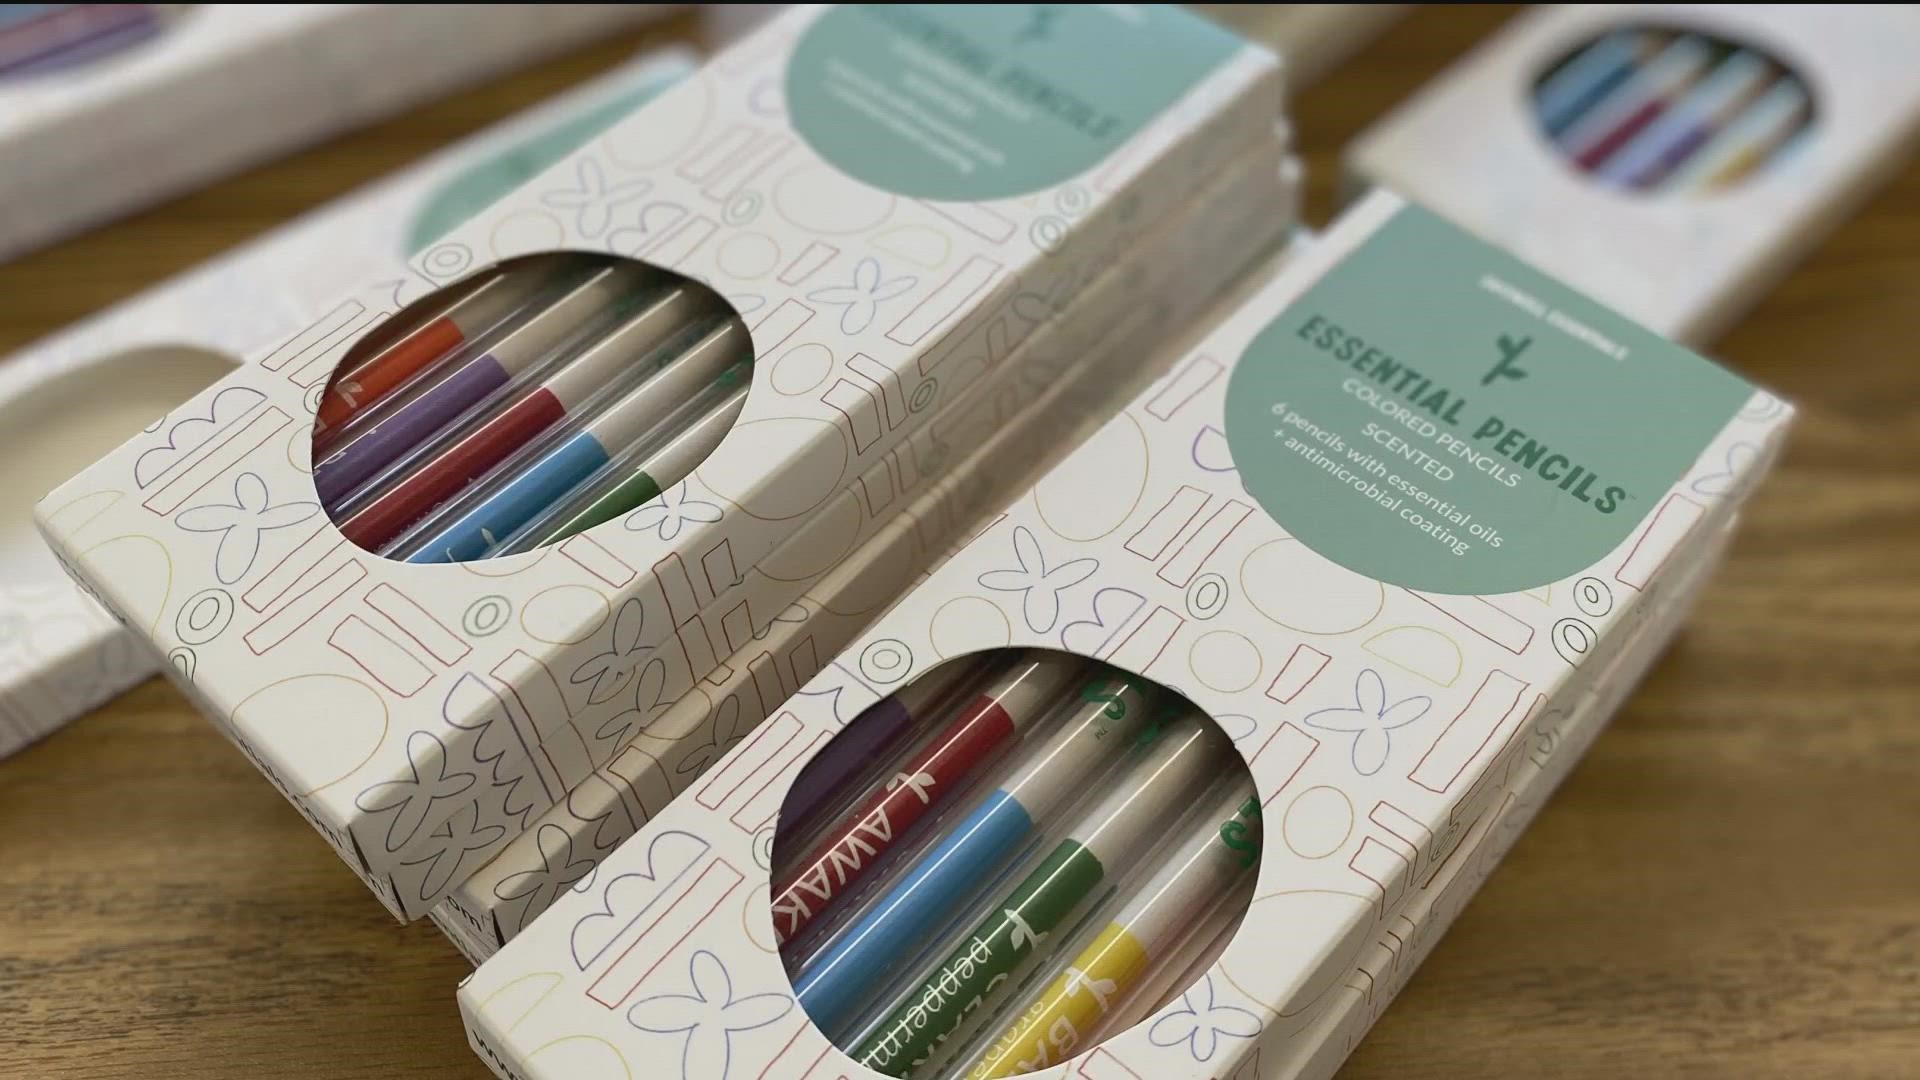 New scented pencils could put students in the mood to learn | cbs8.com